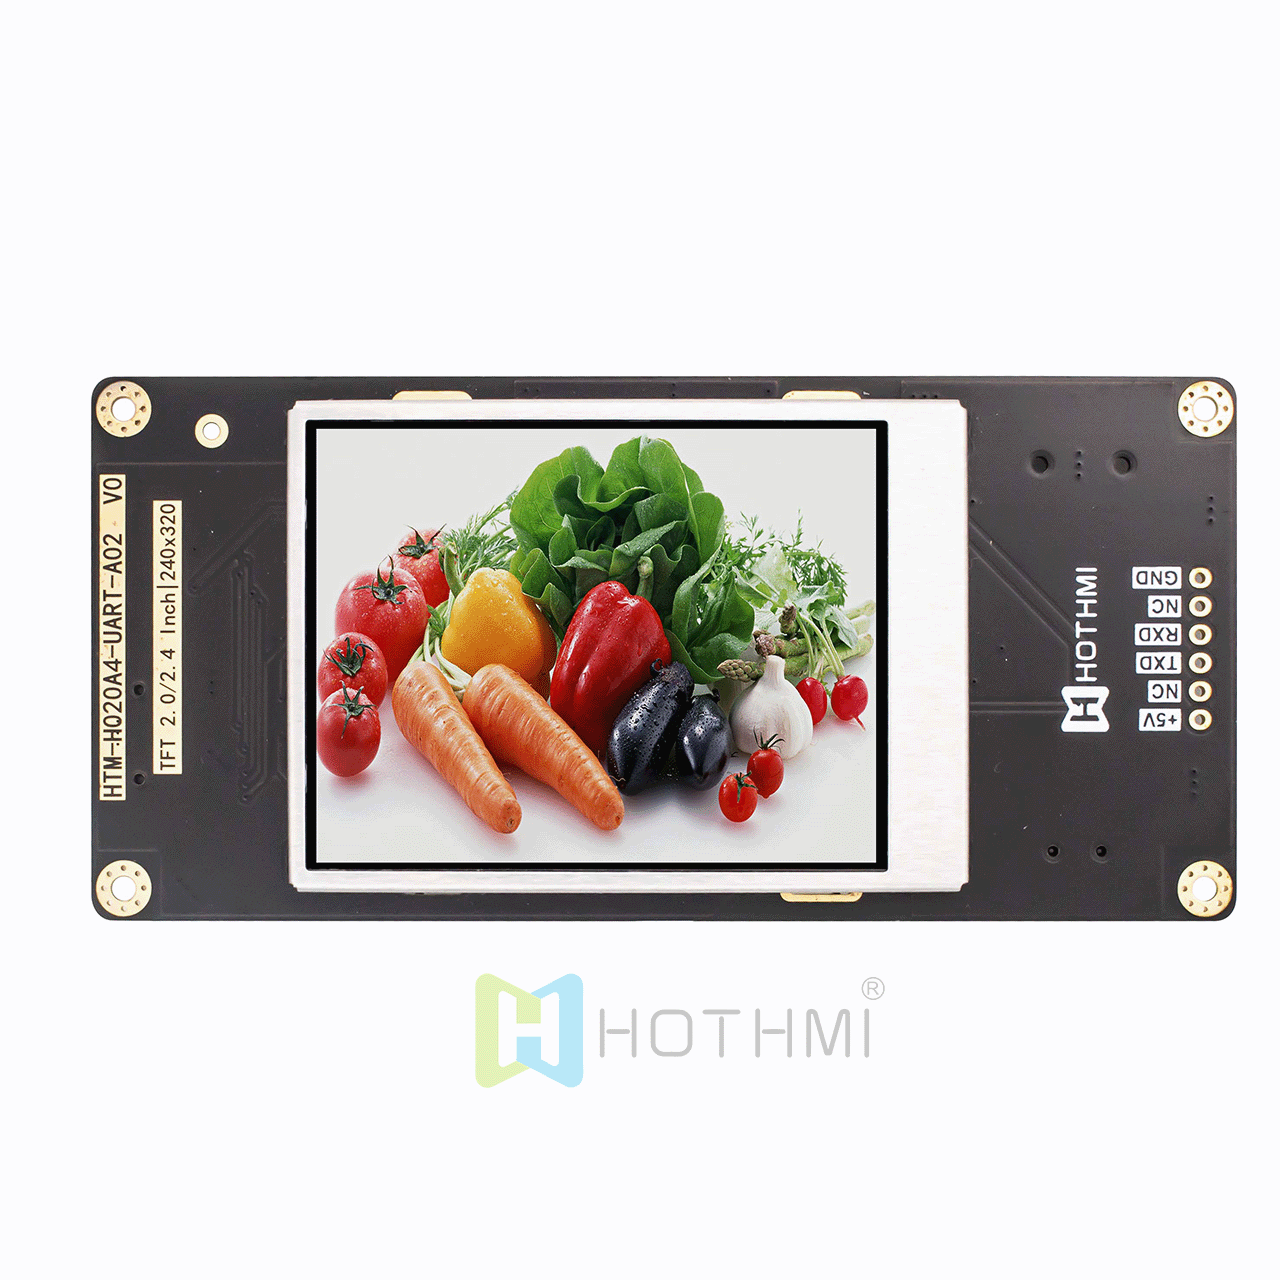 2.4-inch transflective TFT display TN 240x320px sunlight readable MCU interface/can be equipped with touch screen